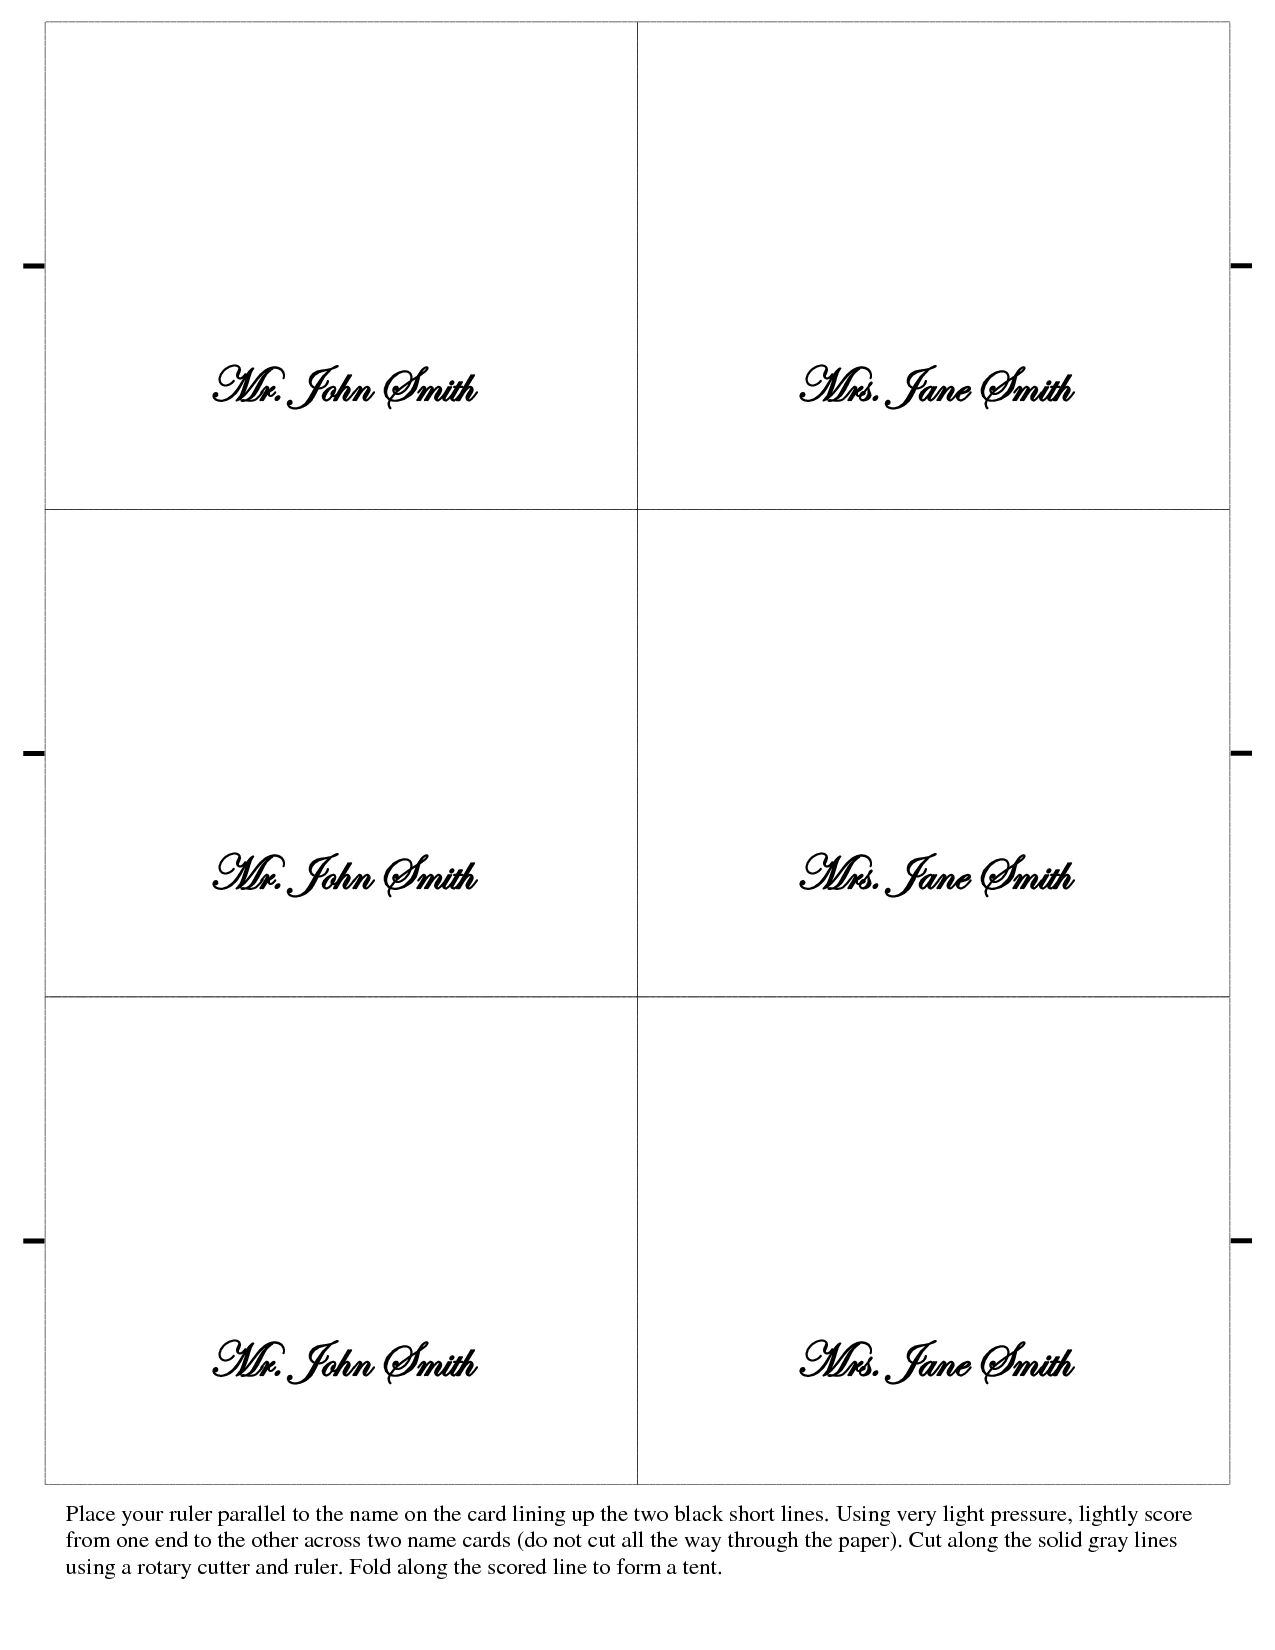 Free Place Card Templates 6 Per Page – Atlantaauctionco Pertaining To Place Card Template 6 Per Sheet